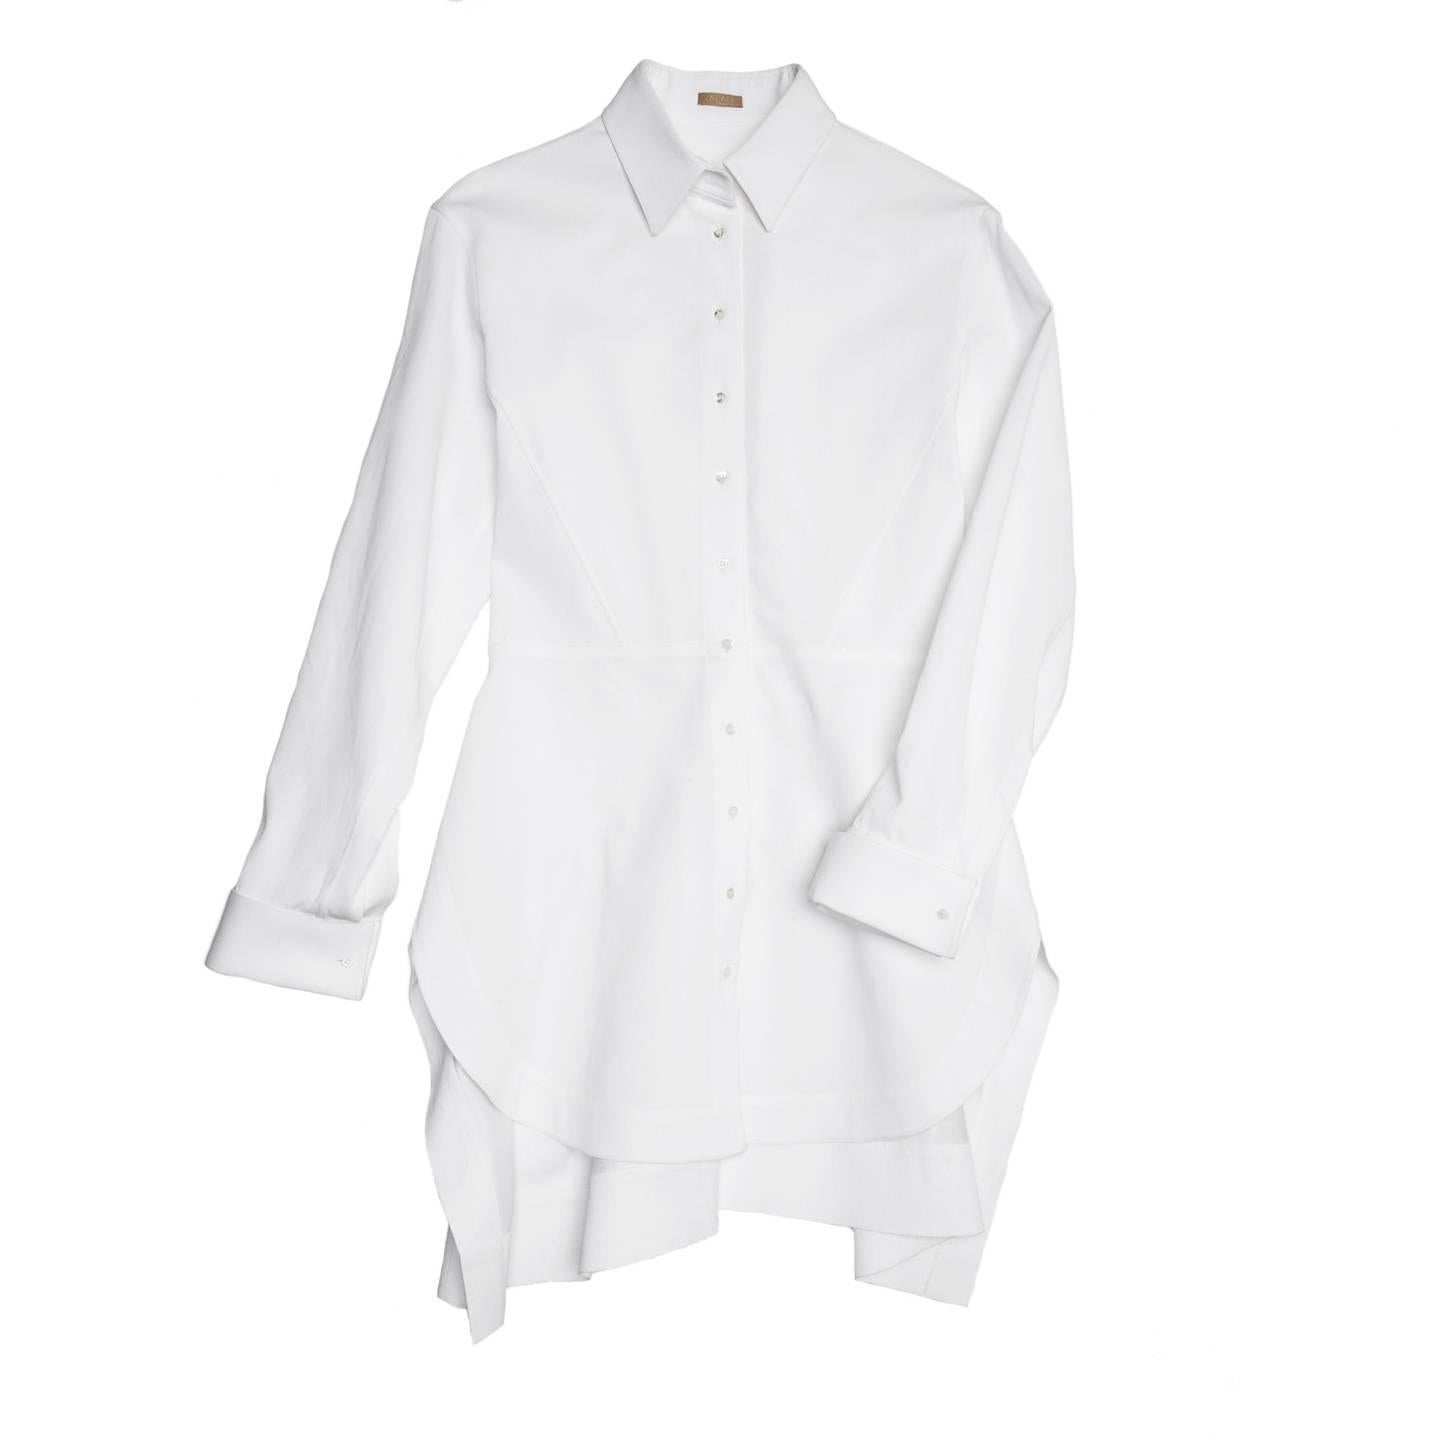 White thick cotton twill long shirt with peter pan collar, peplum waist seam at front and belt insert at back. The skirt part is flared and both the back body and skirt are ruched. The front hem is round while the back is squared; the cuffs are